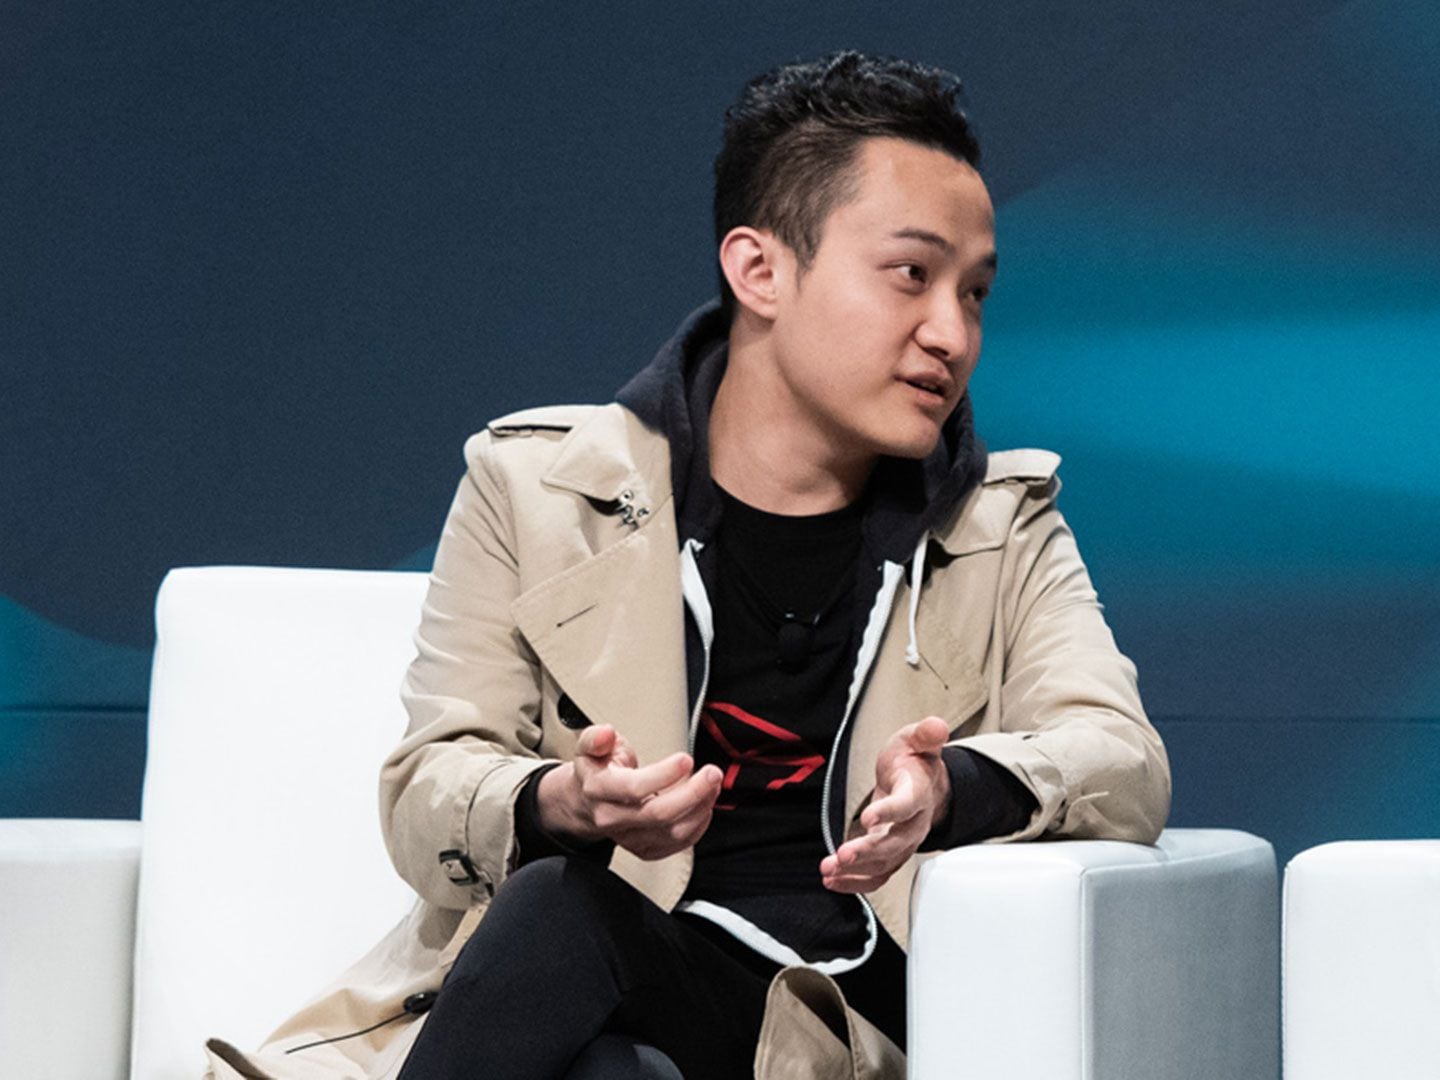 Justin Sun CEO of TRON speaks at Consensus 2019 (CoinDesk)